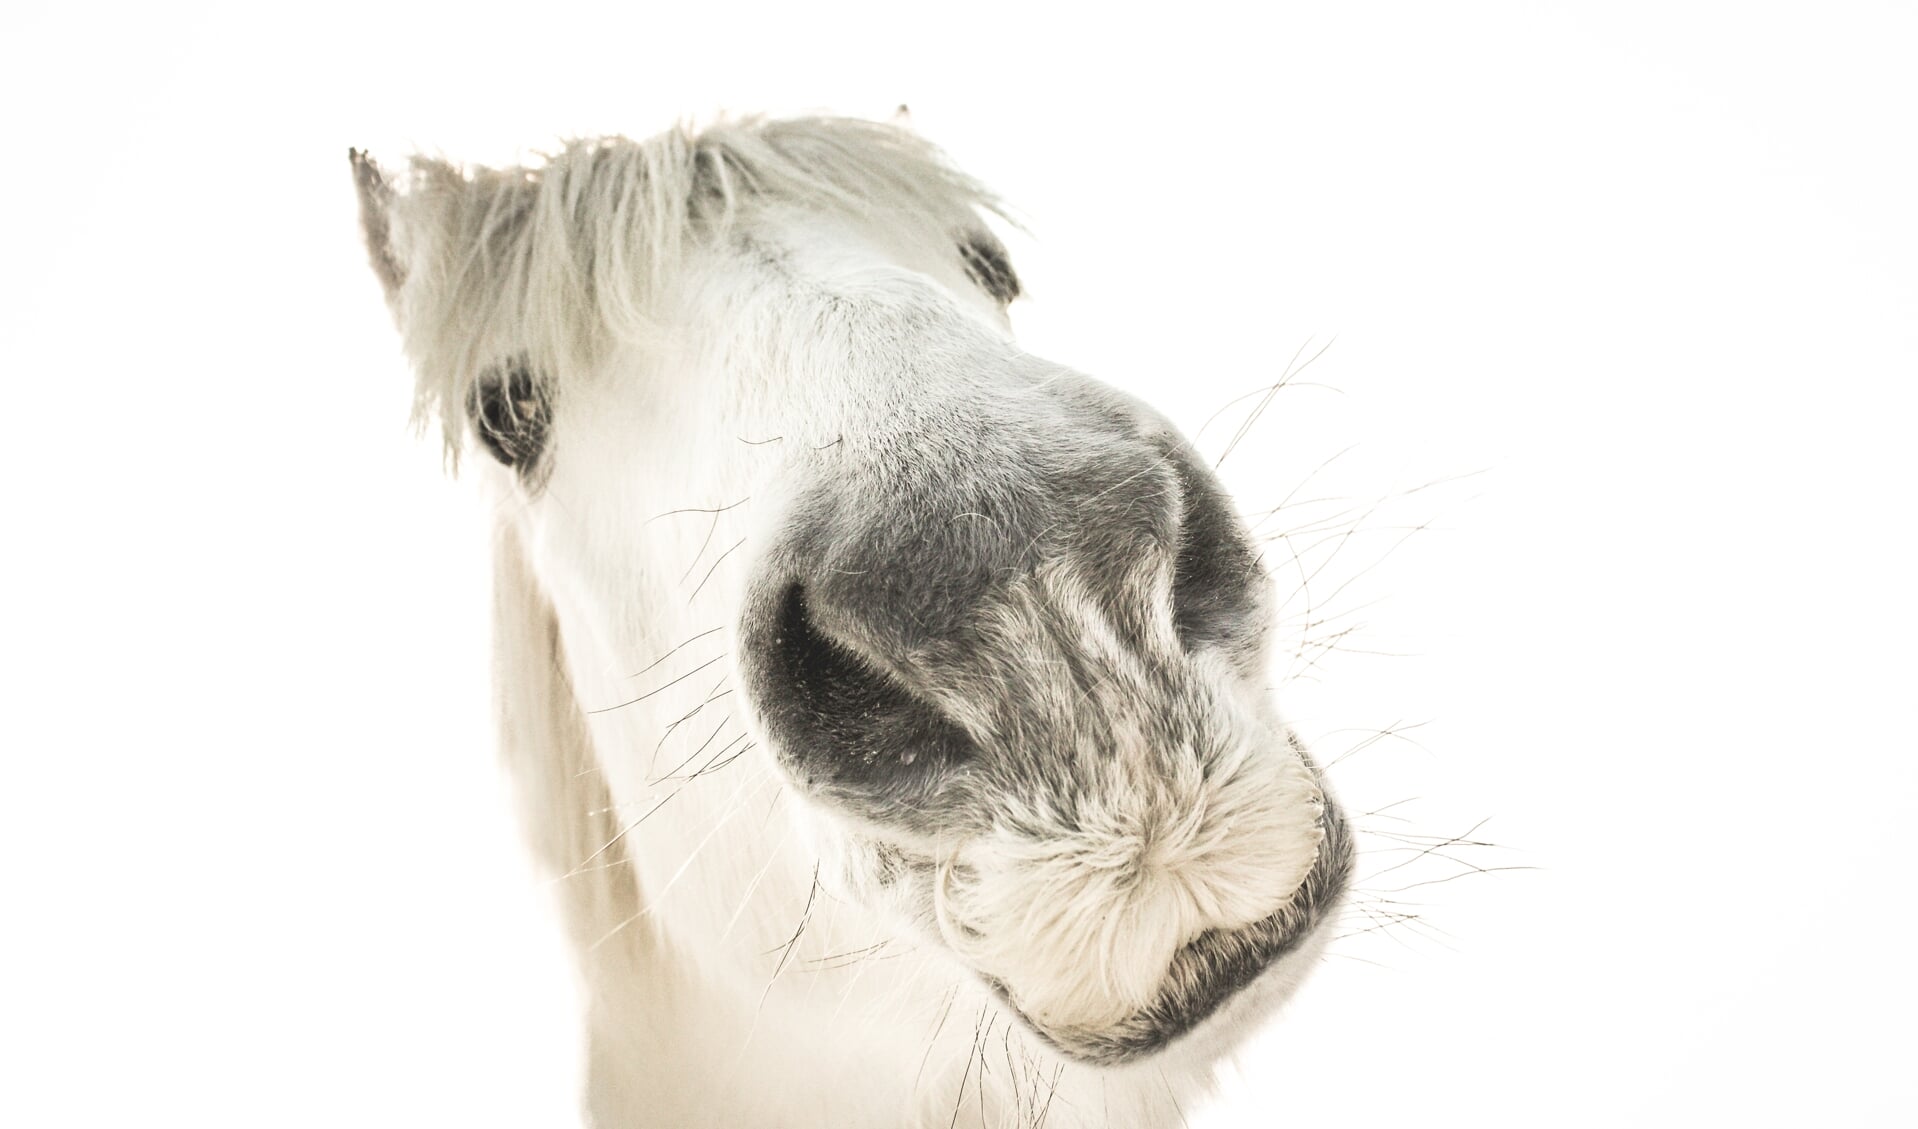 Isolated photo of a funny white horse on a white background.